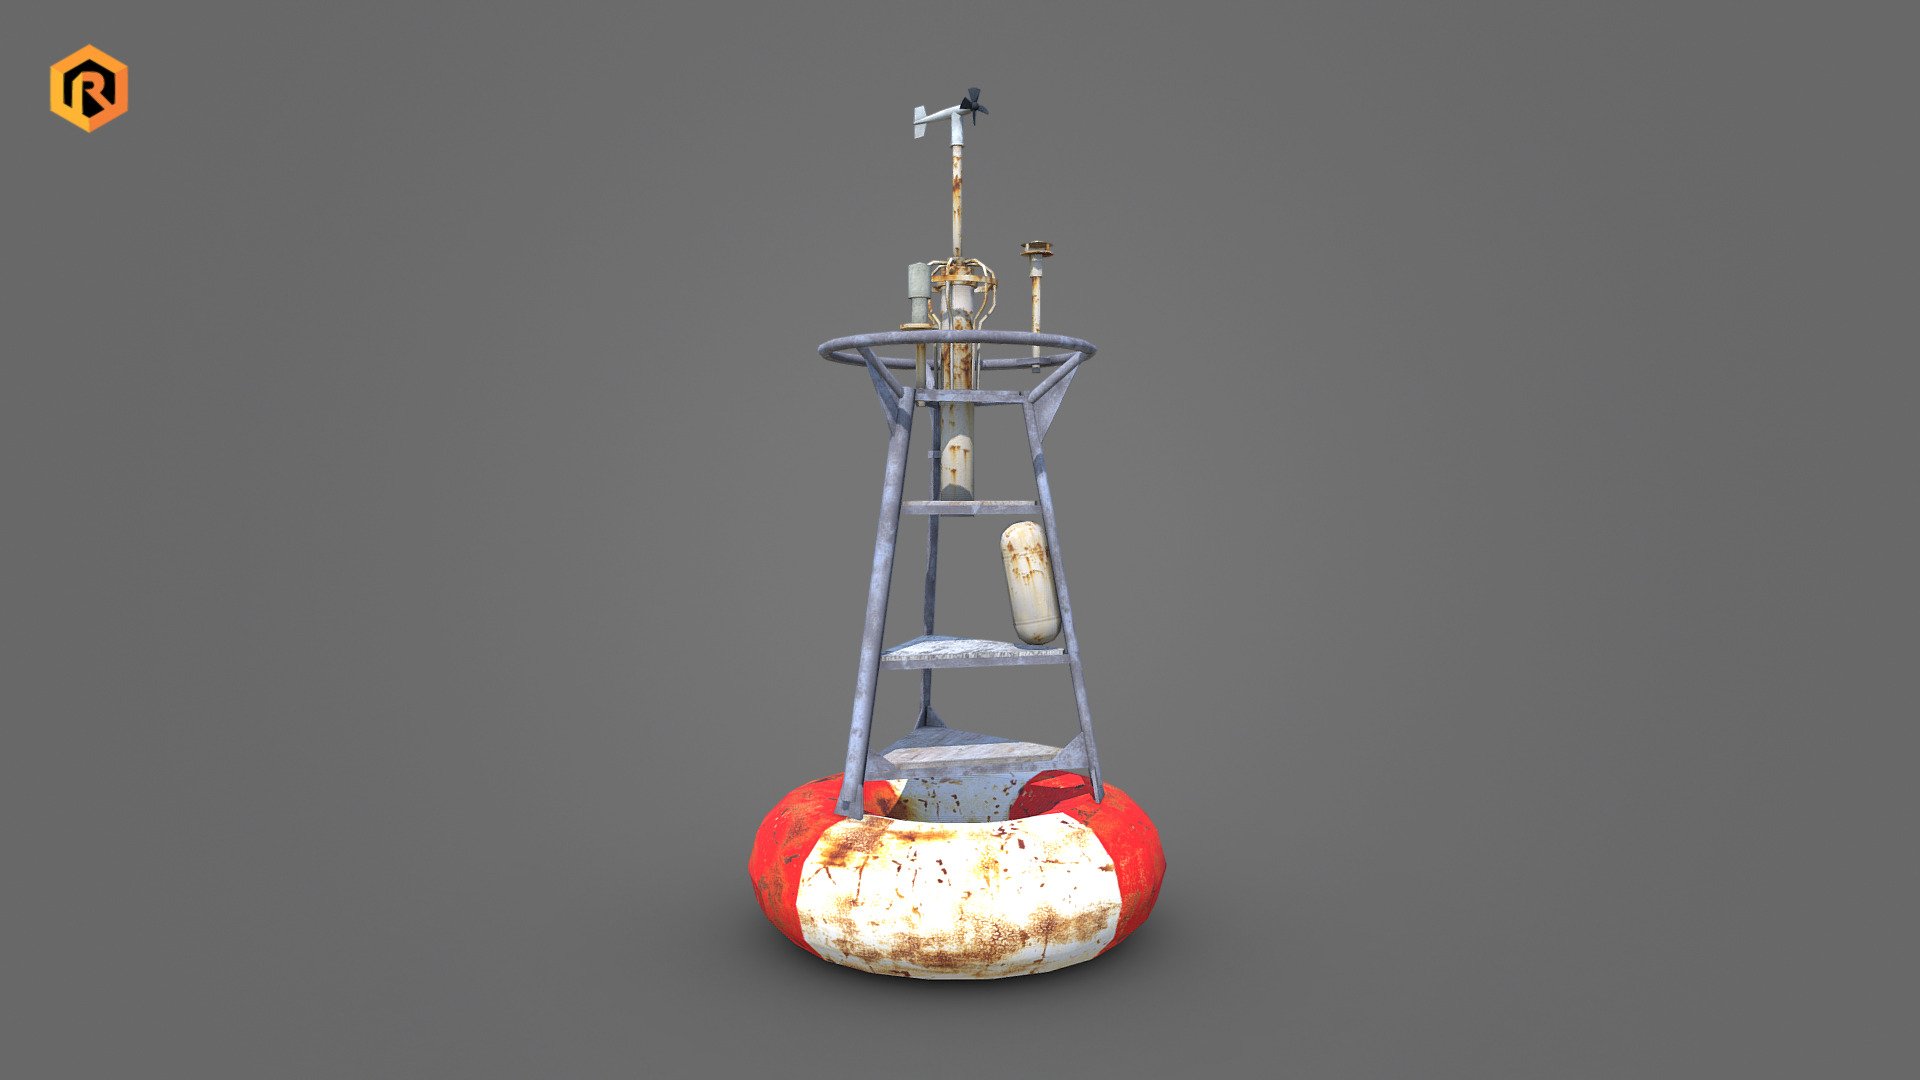 High-quality low-poly 3D model of Ocean Weather Buoy.

It is best for use in games and other VR / AR, real-time applications such as Unity or Unreal Engine.

It can also be rendered in Blender (ex Cycles) or Vray as the model is equipped with detailed textures.

We have made every effort to ensure these textures are as detailed as possible and made with the greatest care.

Technical details:

- 2048 x 2048 Diffuse and AO textures

- 2596 Triangles

- 1451 Polygons

- 1500 Vertices

- Model is one mesh

- Model completely unwrapped

- Model is fully textured with all materials applied.

- Pivot point centered at world origin

- Model scaled to approximate real world size (centimeters)

- All nodes, materials and textures are appropriately named - Meteorological Buoy - Buy Royalty Free 3D model by Rescue3D Assets (@rescue3d) 3d model